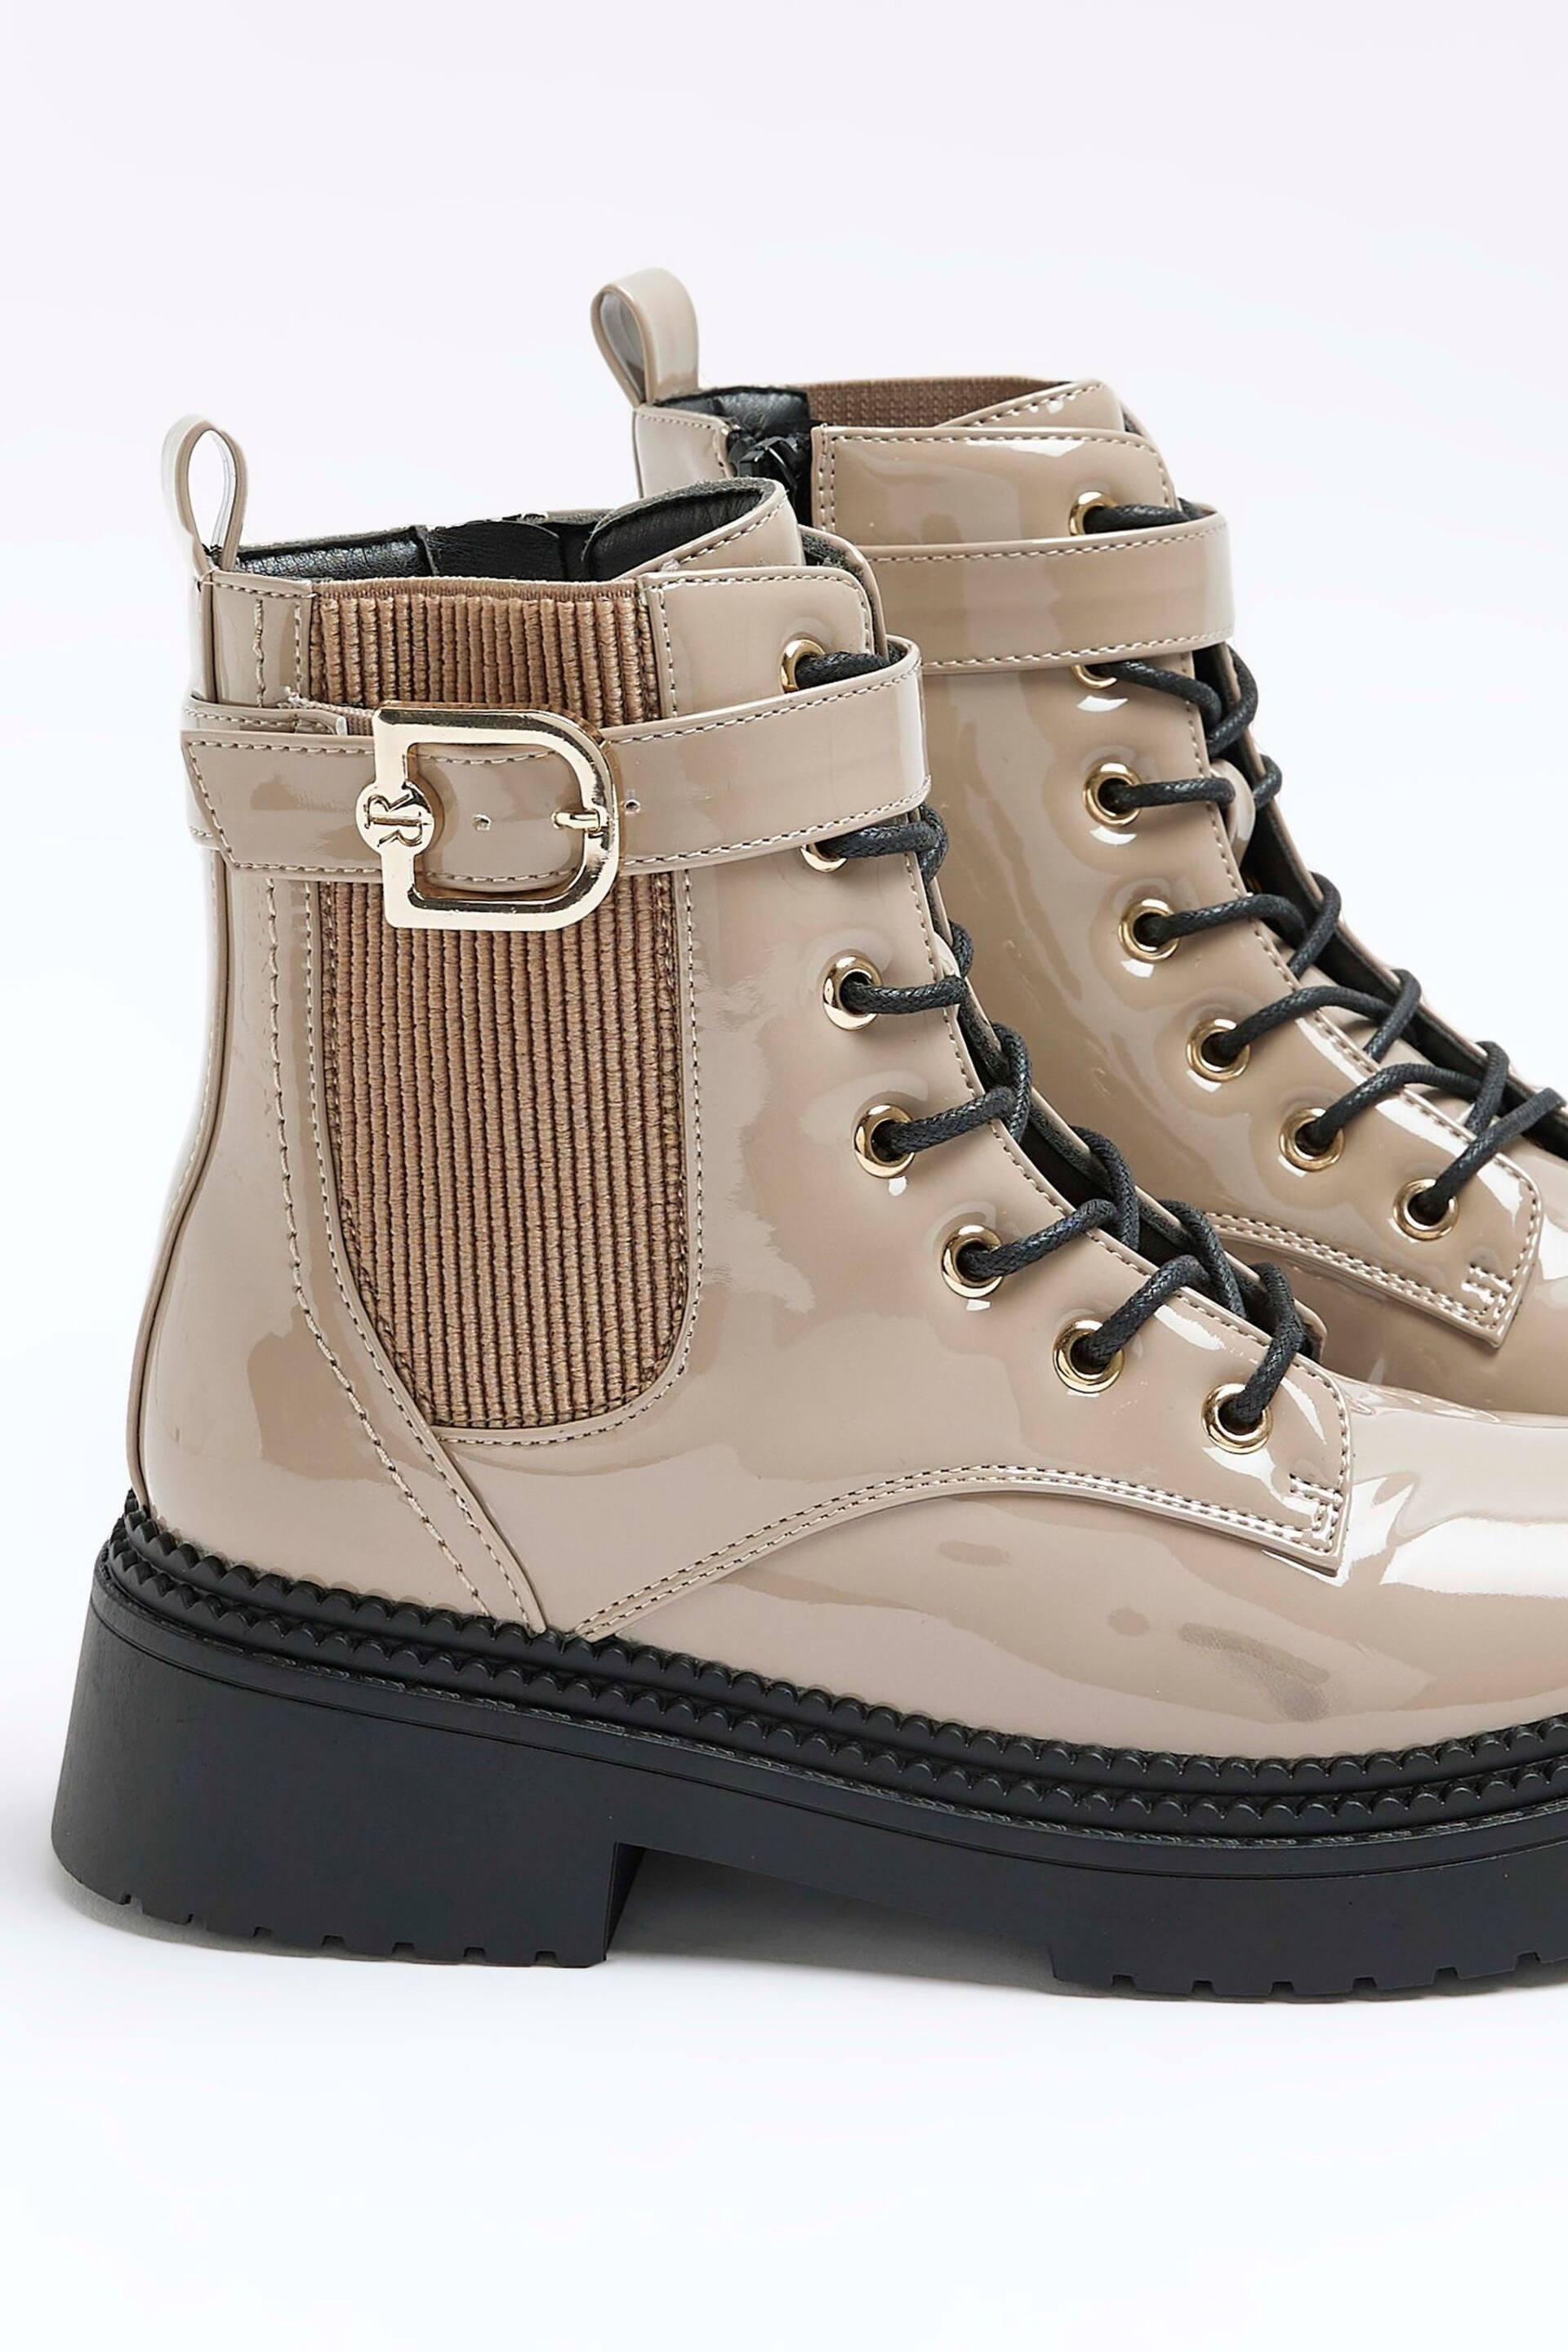 River Island Brown Lace Up Buckle Boots - Image 4 of 6